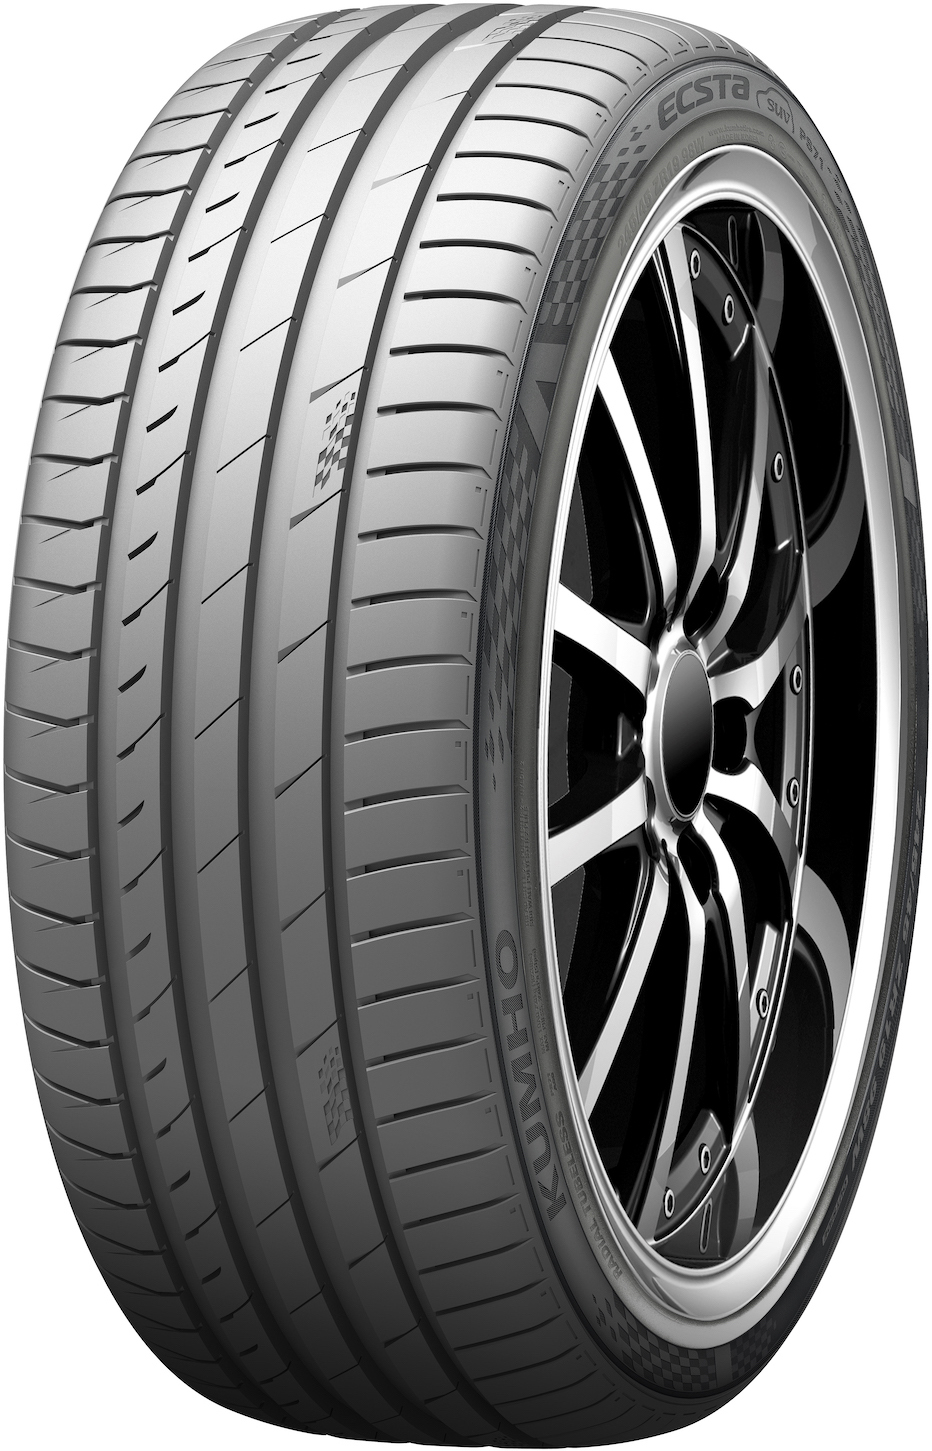 Anvelope auto KUMHO Ecsta PS71 SUV 255/55 R18 109Y